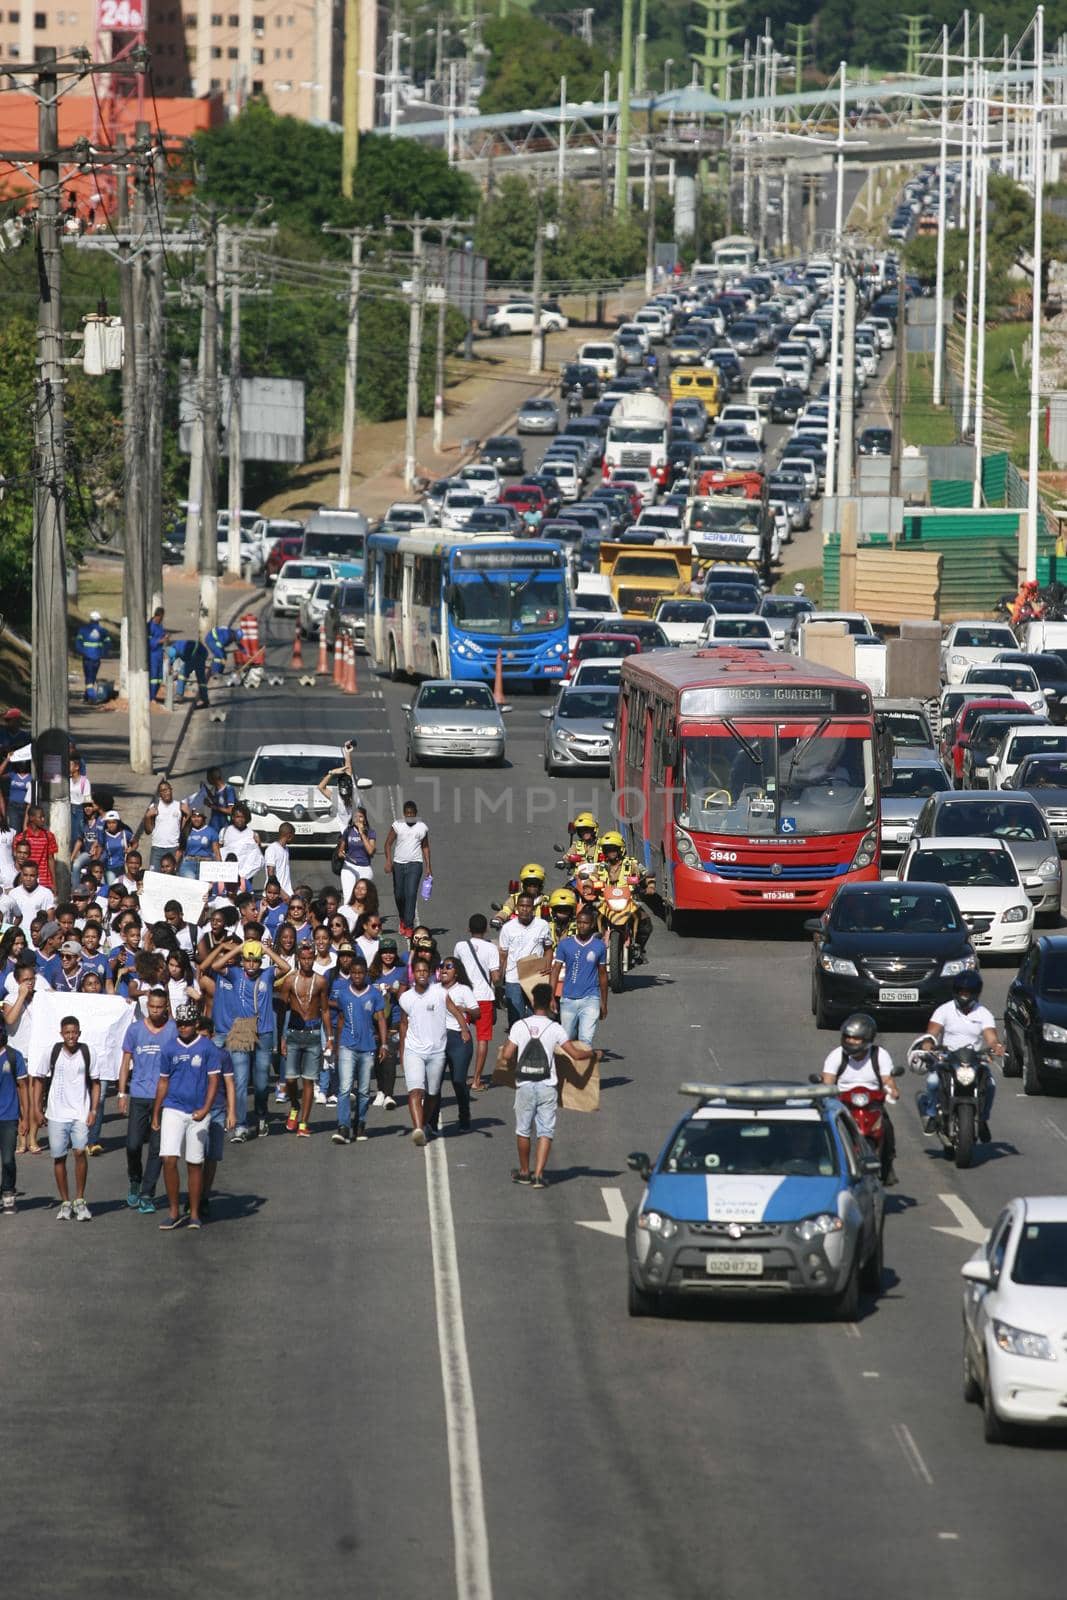 salvador, bahia / brazil - july 15, 2016: Students of the public demonstrate on Luiz Viana Avenue in Salvador, due to layoffs of employees in schools.